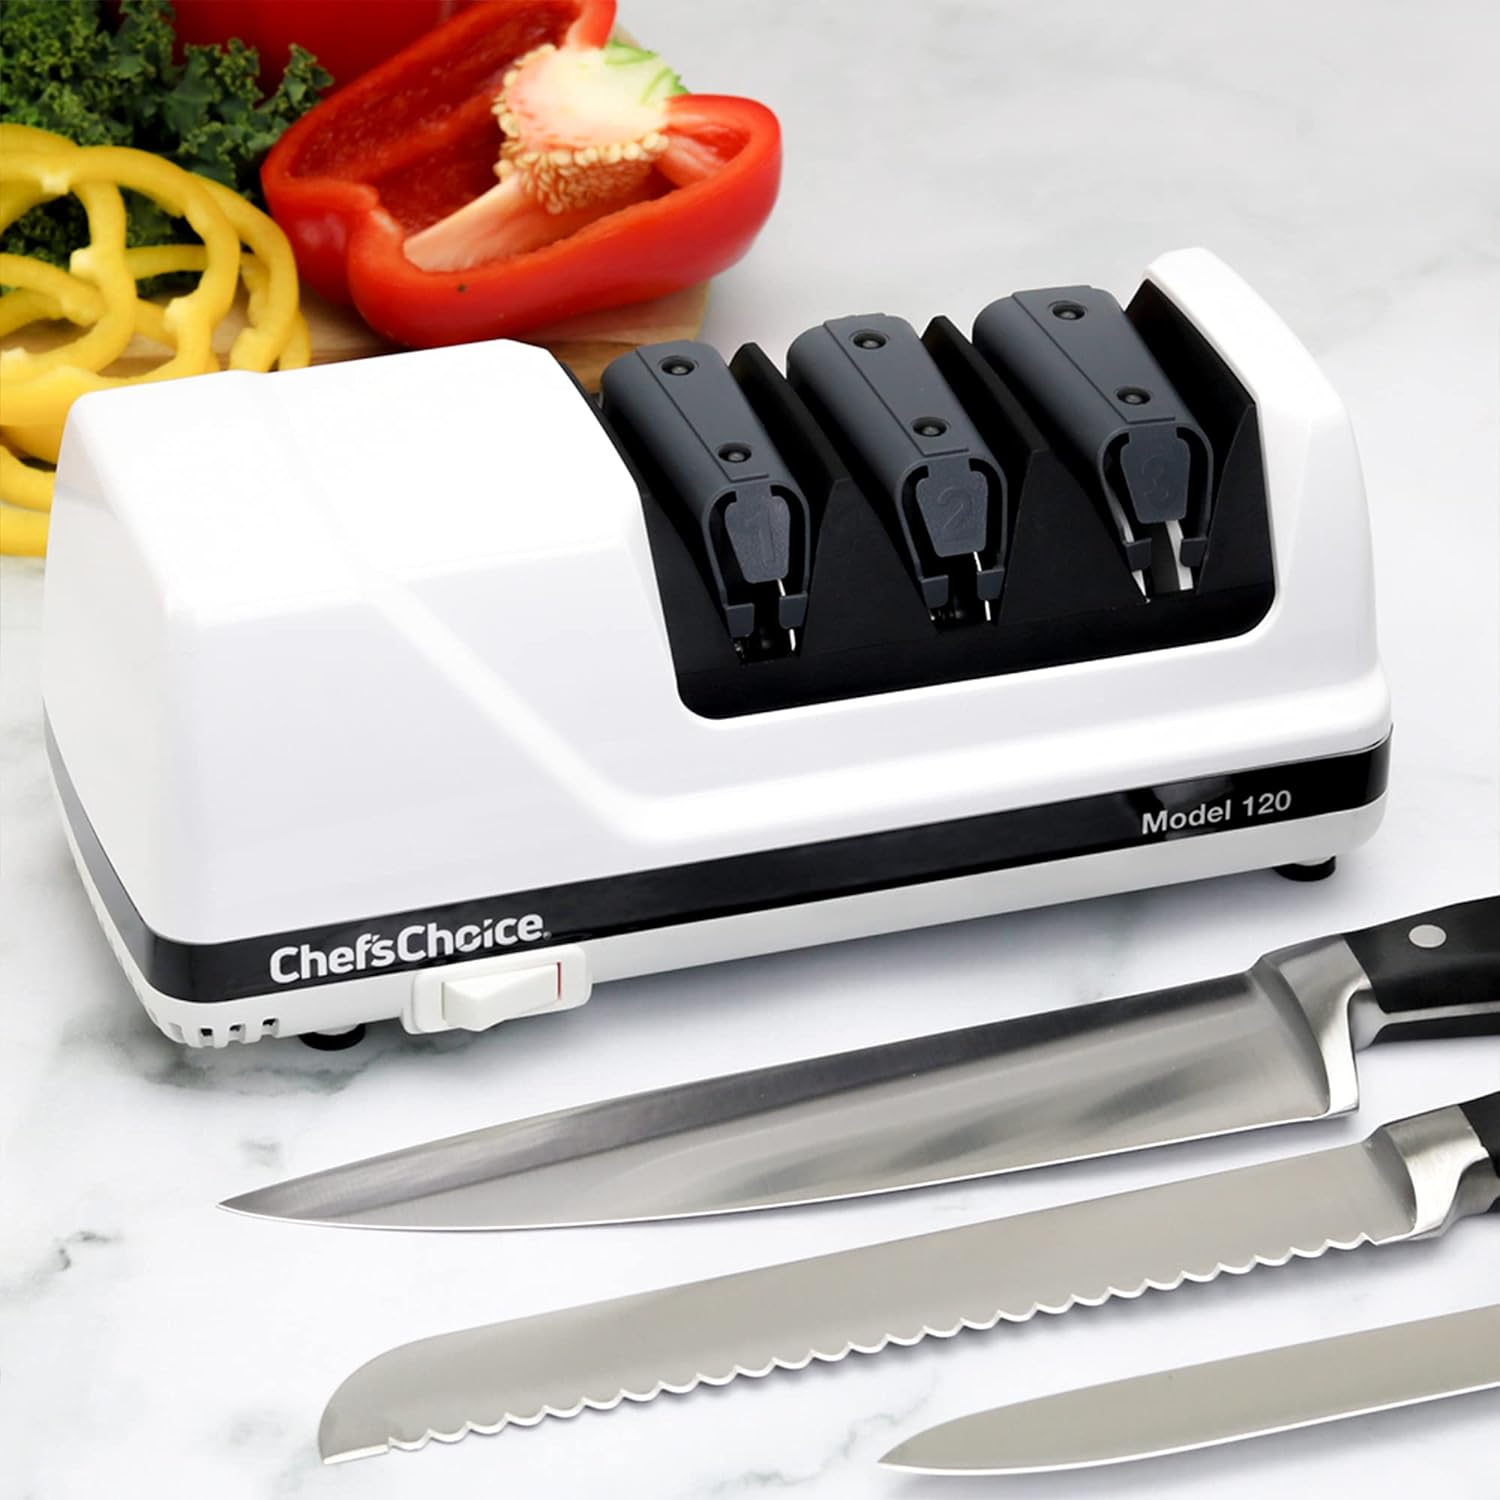 ChefsChoice Hone EdgeSelect Professional Electric Knife Sharpener for 20-Degree Edges Diamond Abrasives Precision Guides for, Straight and Serrated Knives Made in USA, 3-Stage, White